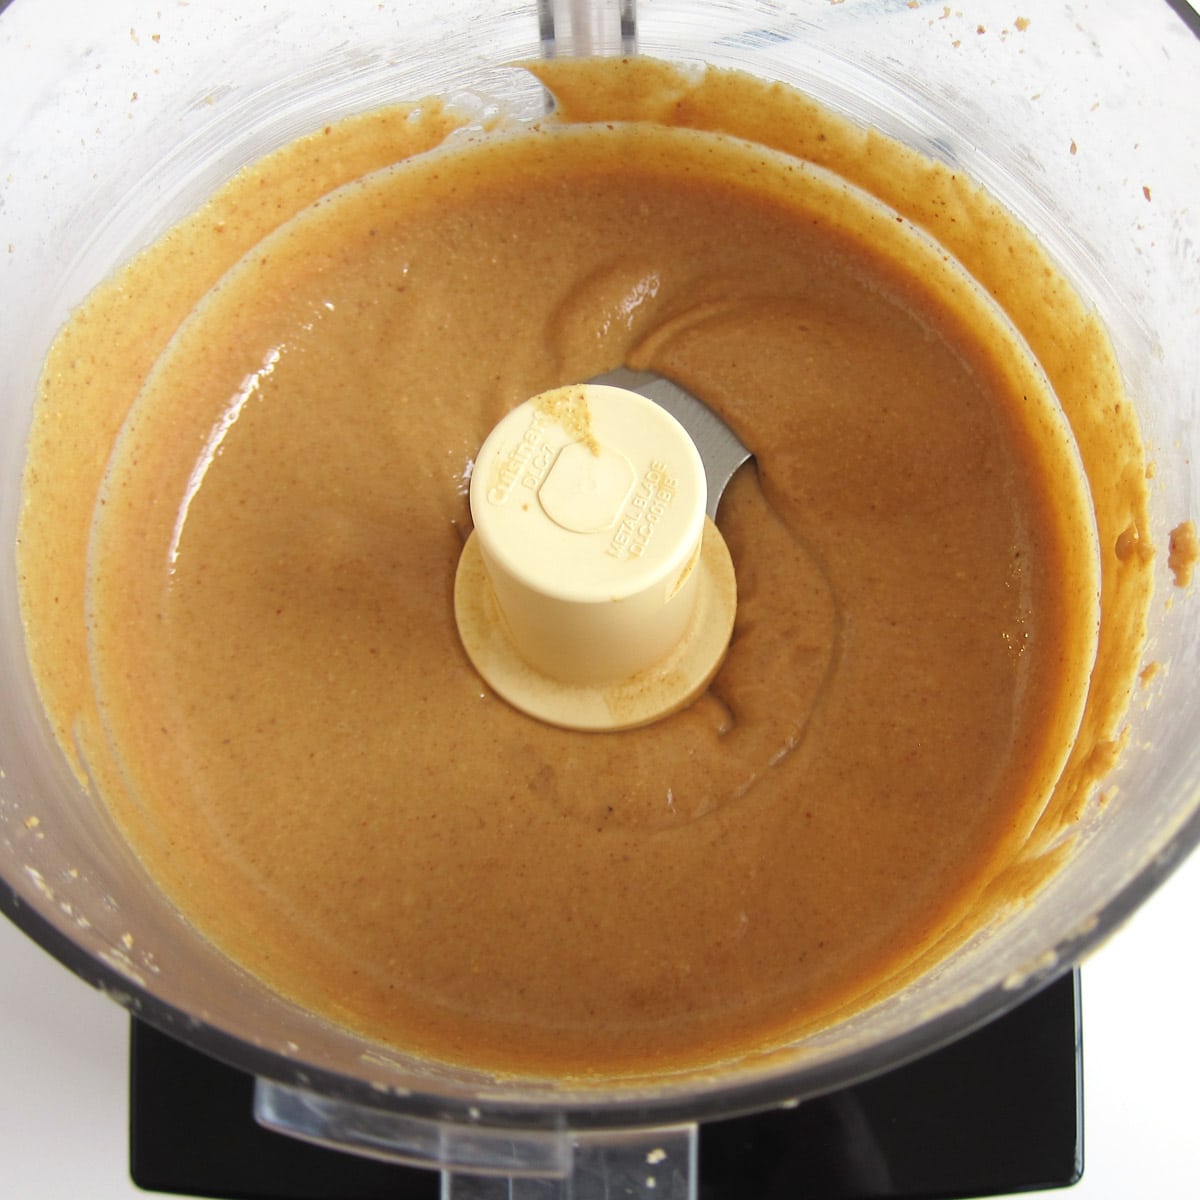 homemade peanut butter that's been pureed until smooth and creamy.